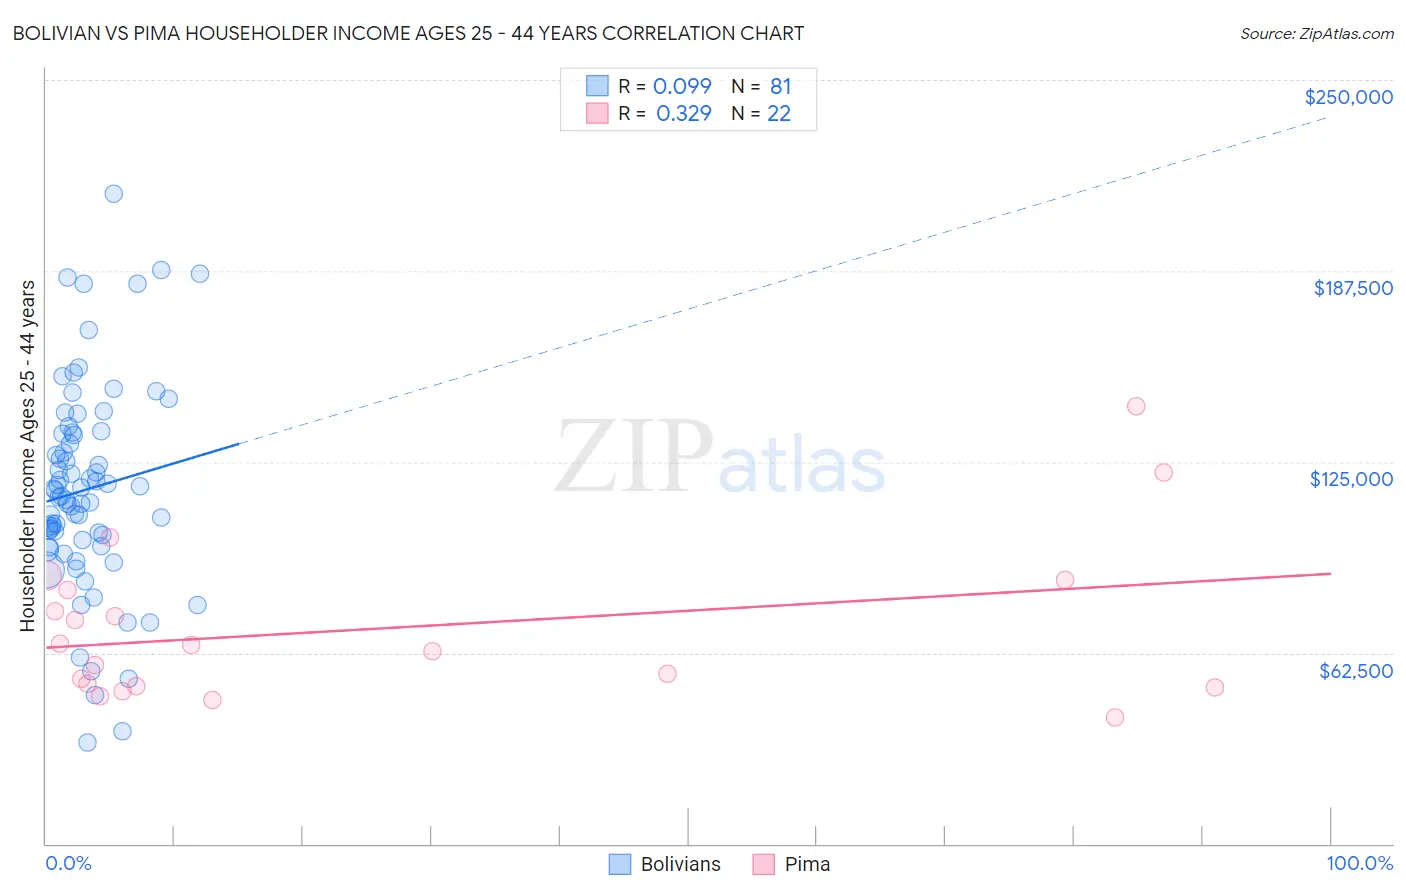 Bolivian vs Pima Householder Income Ages 25 - 44 years